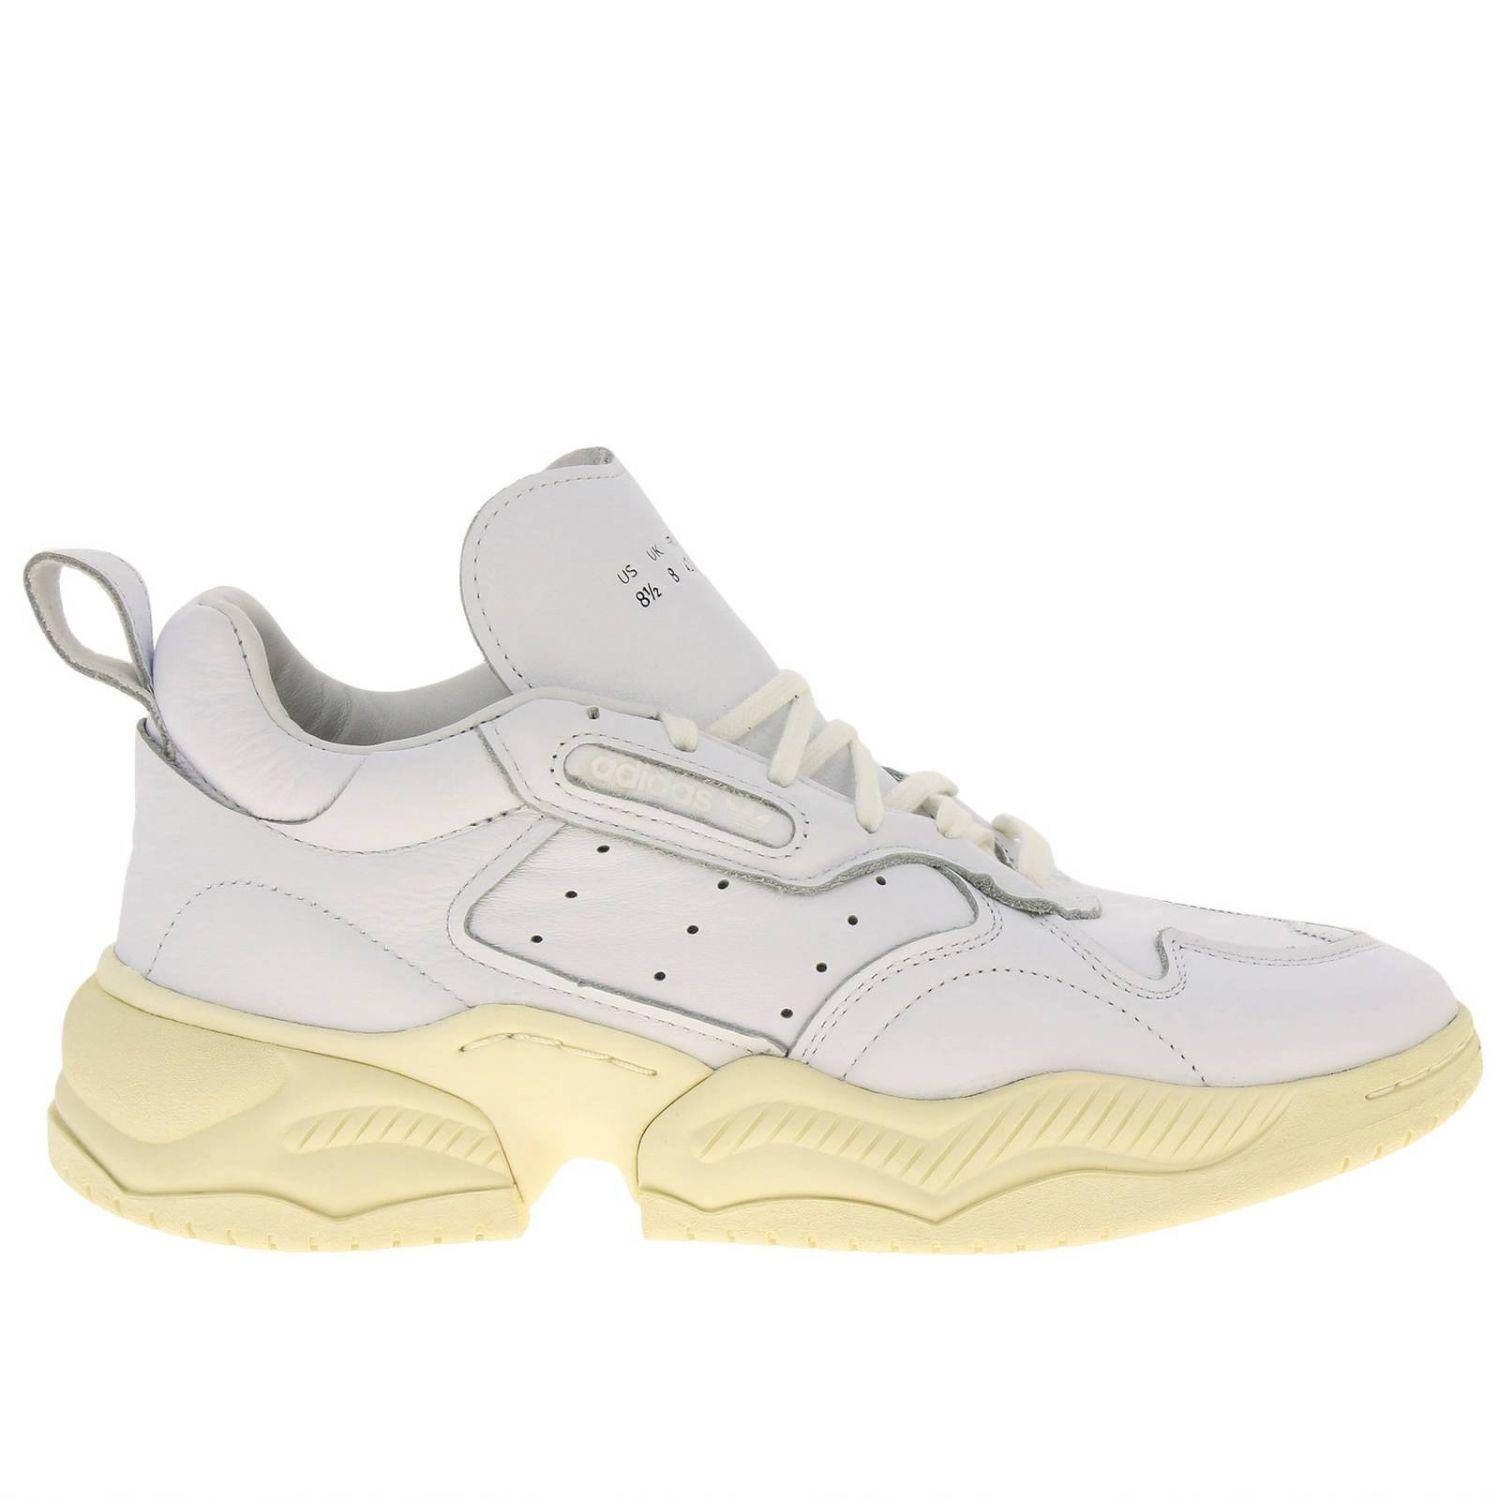 adidas Originals Supercourt Rx Sneakers In Leather With Holes And Maxi ...